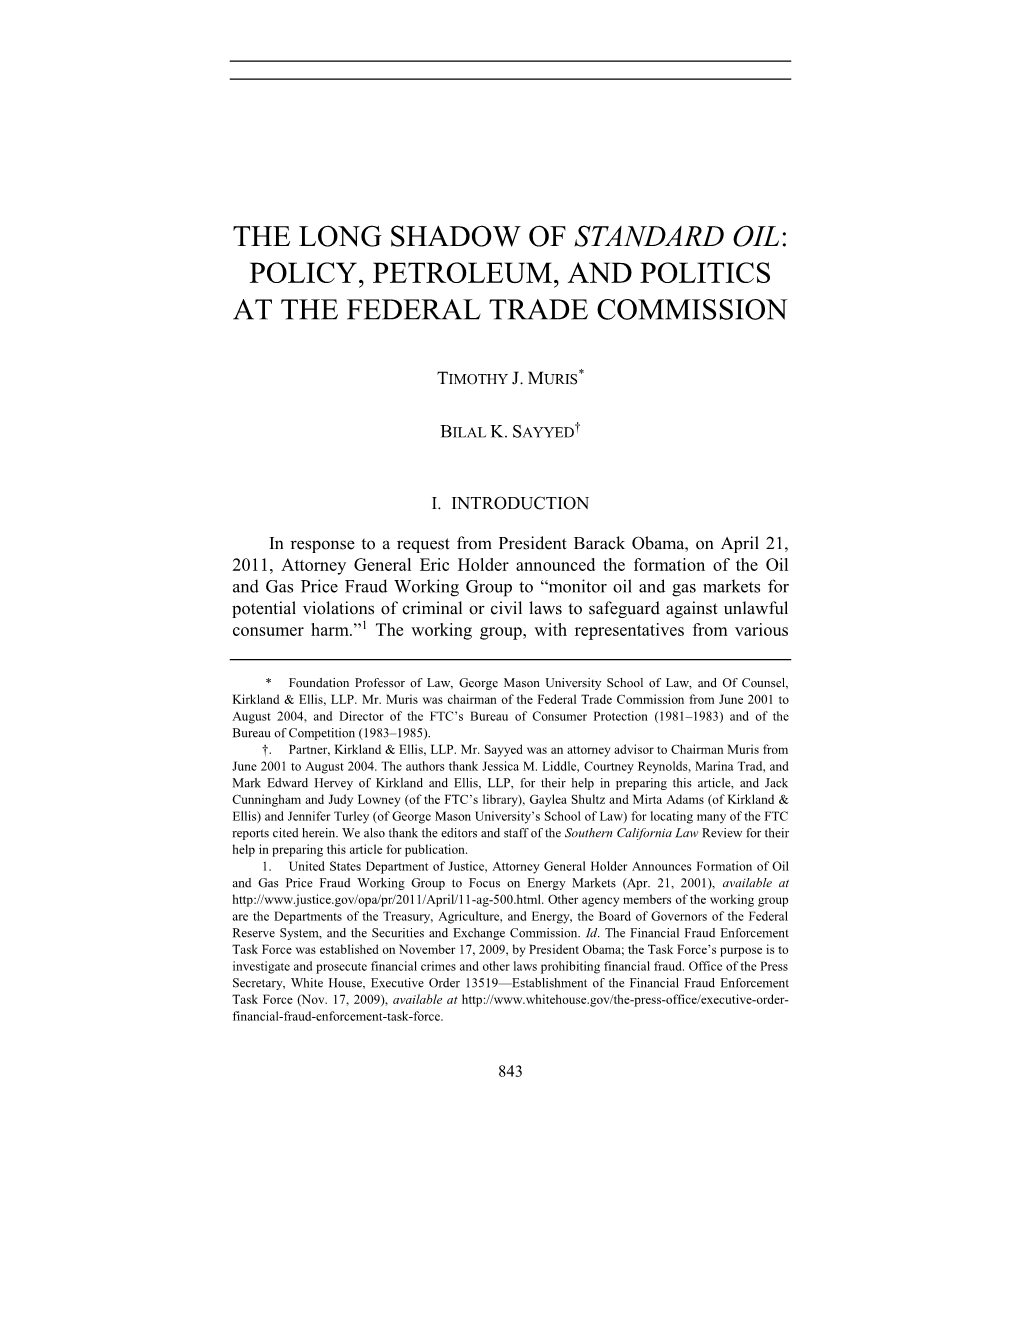 Policy, Petroleum, and Politics at the Federal Trade Commission